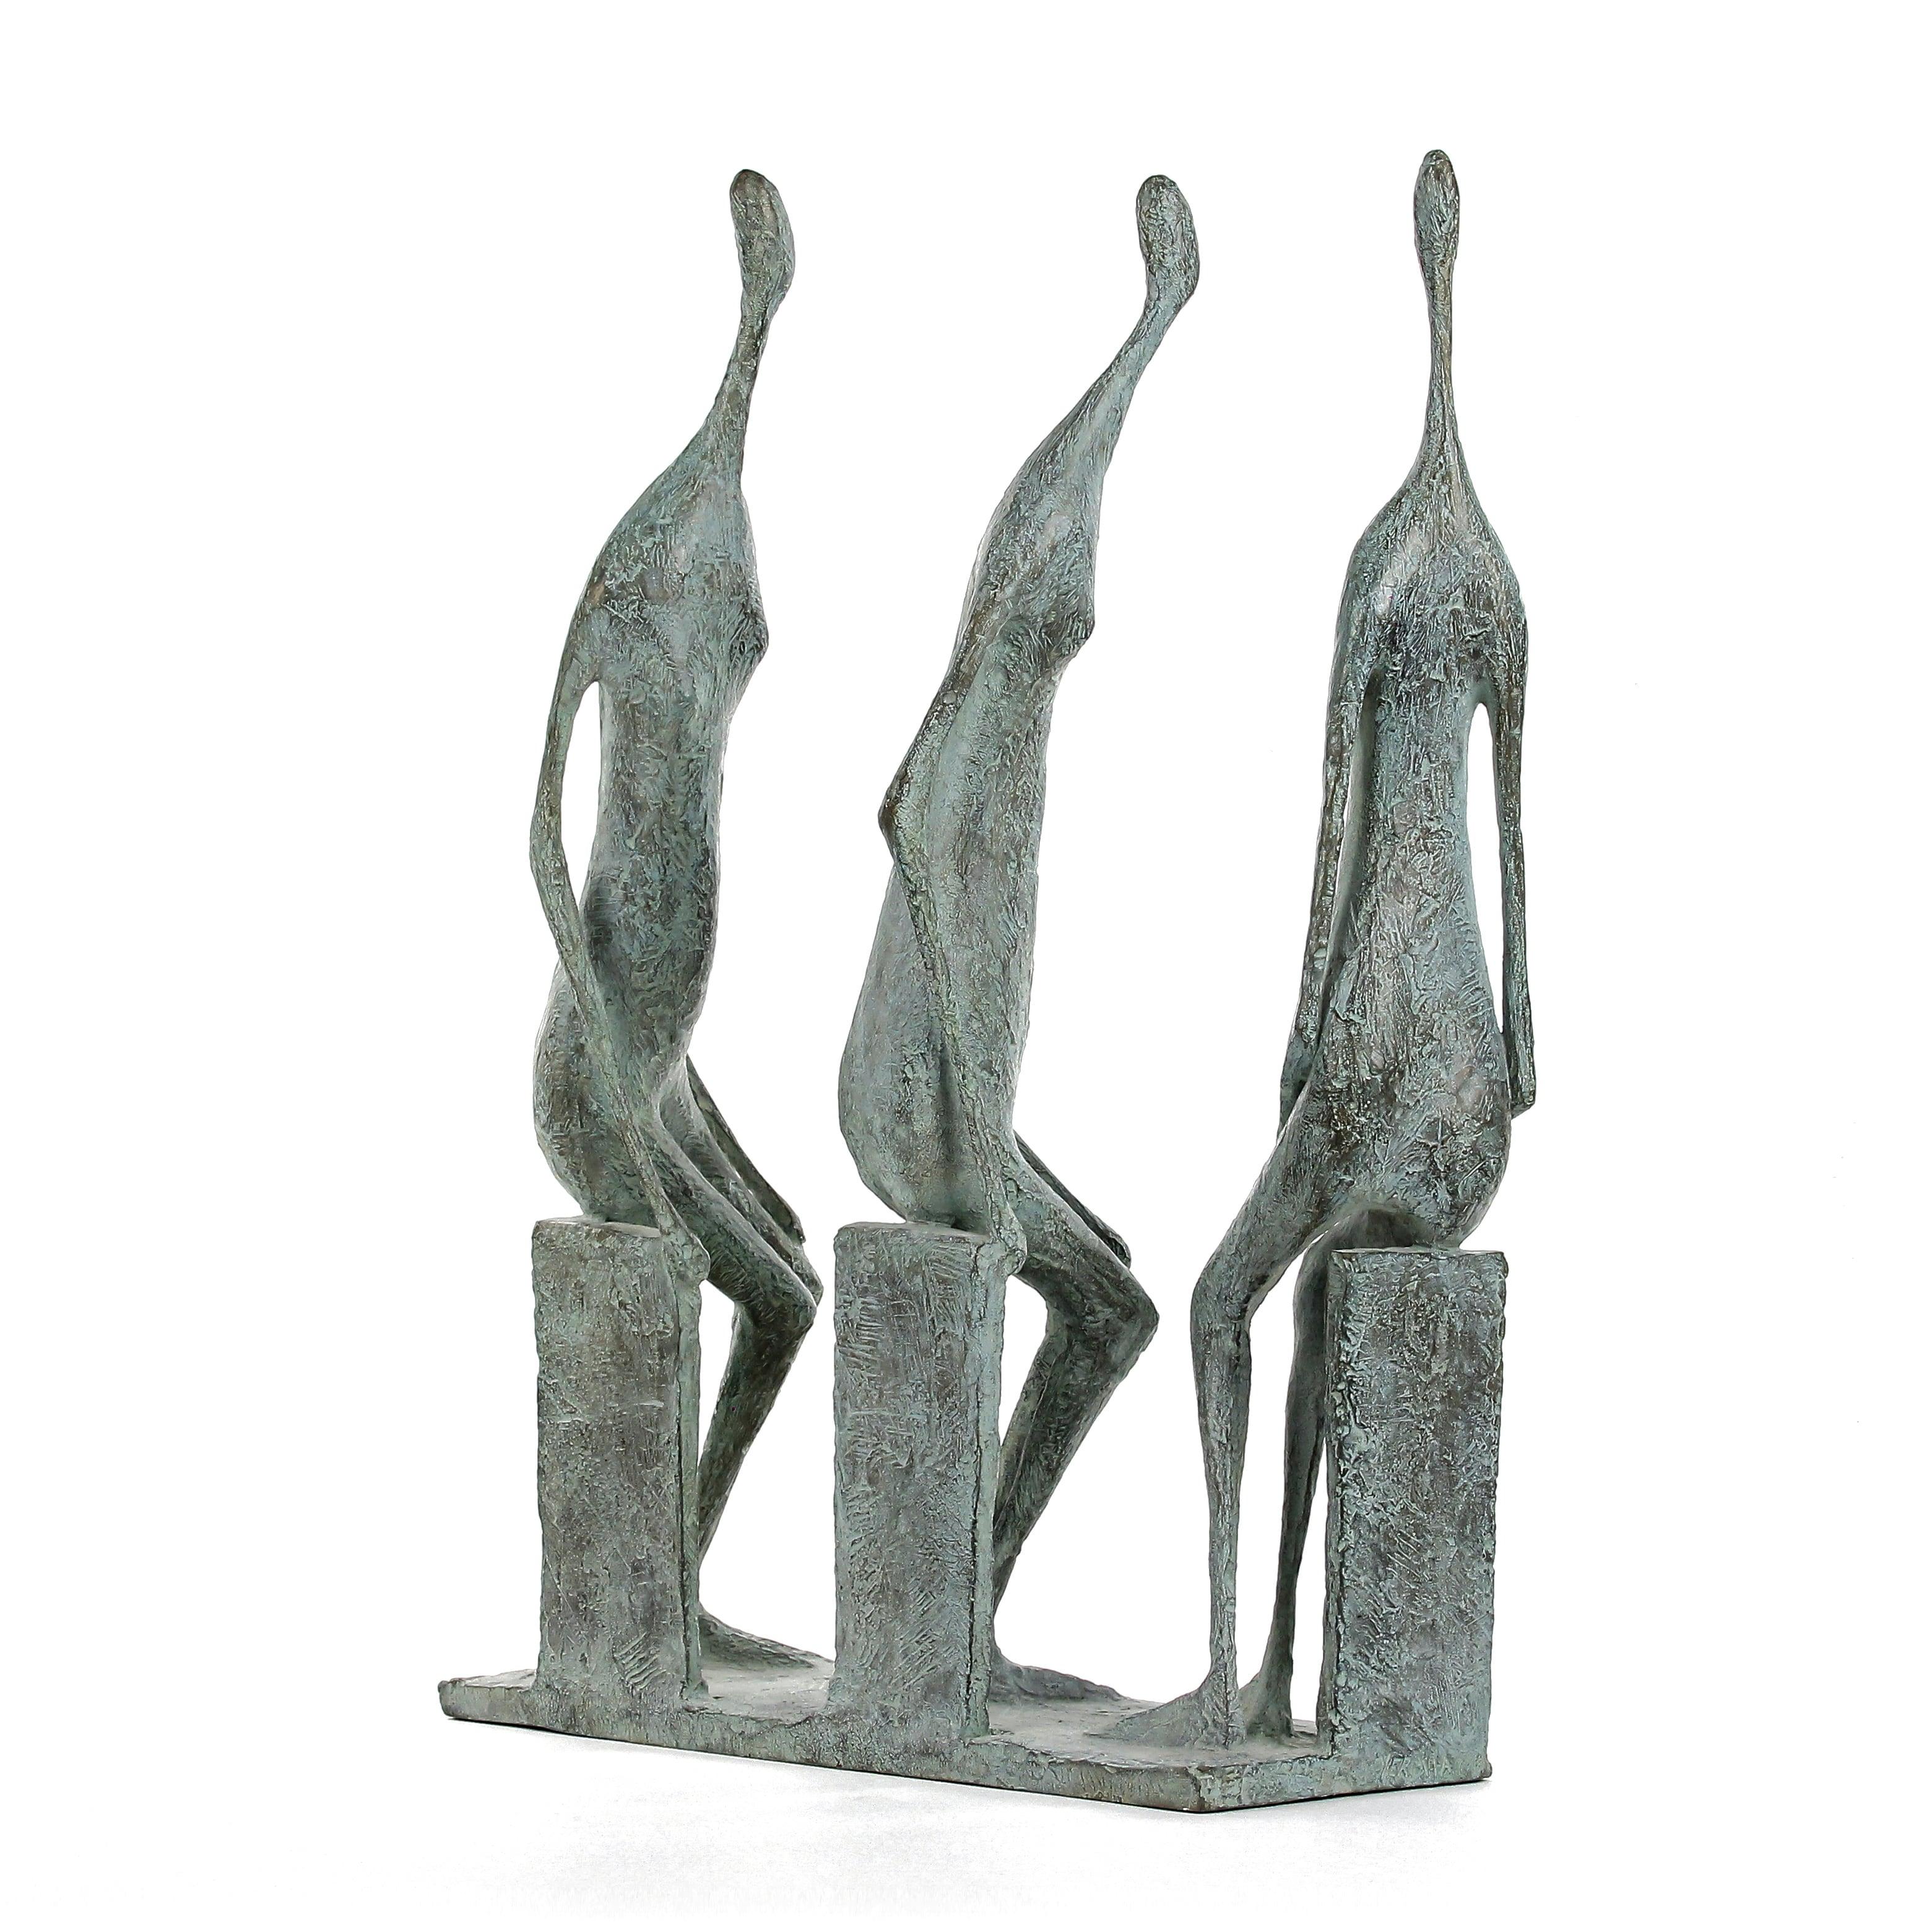 3 Seated Figures II is a bronze sculpture by French artist Pierre Yermia. 